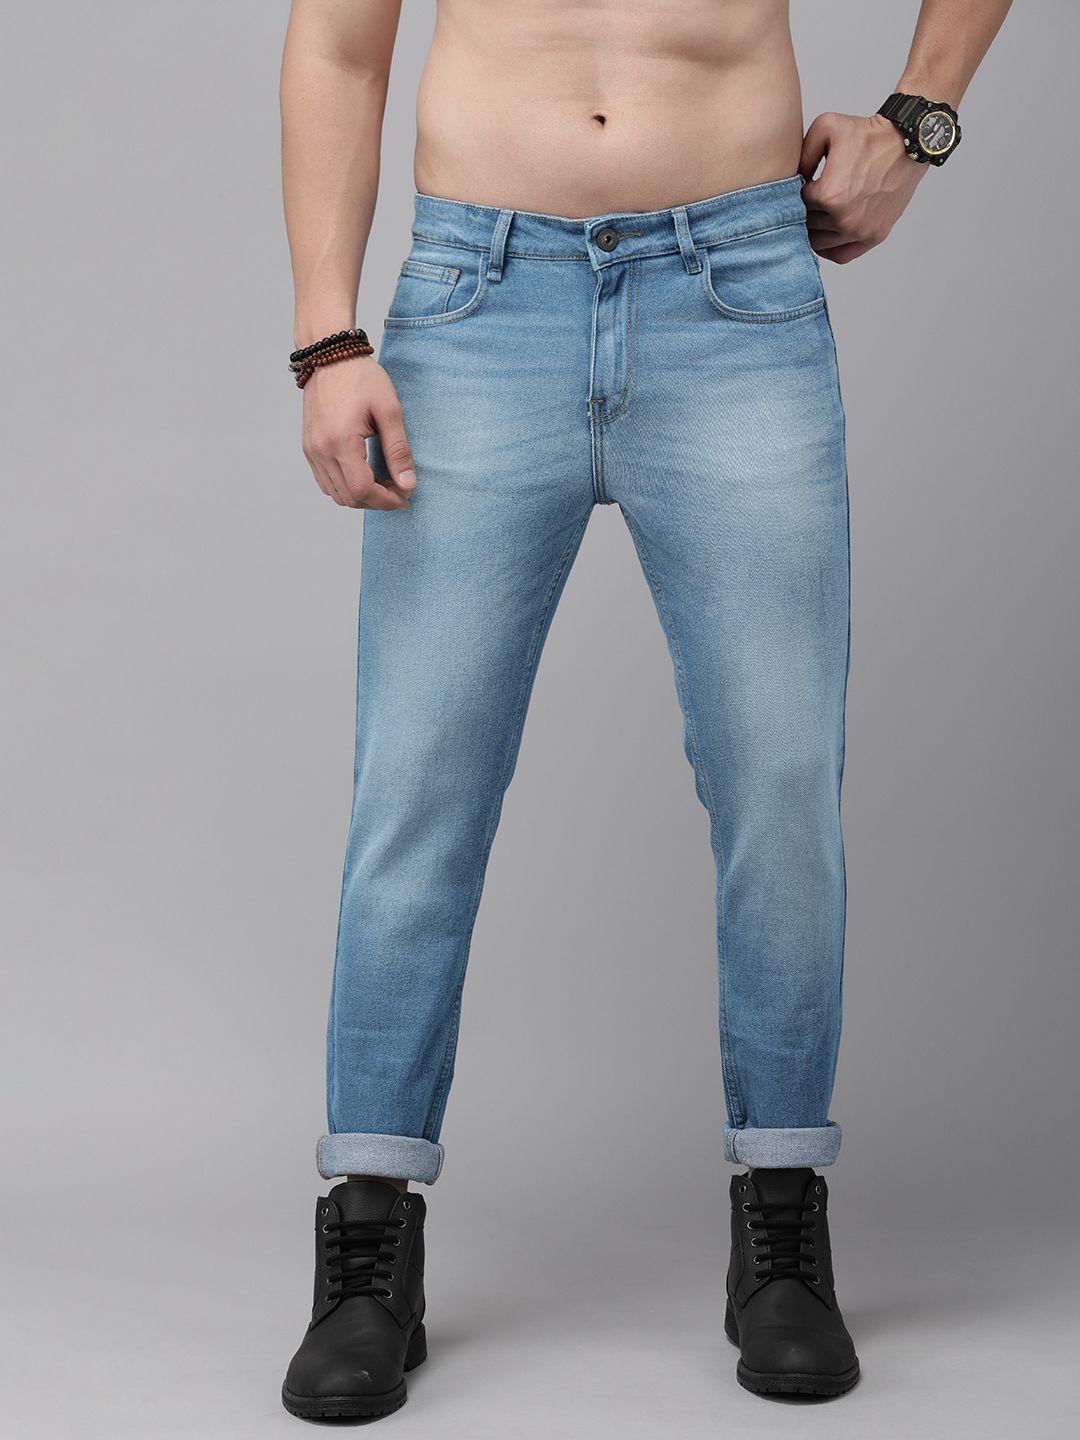 the roadster life co. men slim fit heavy fade stretchable jeans